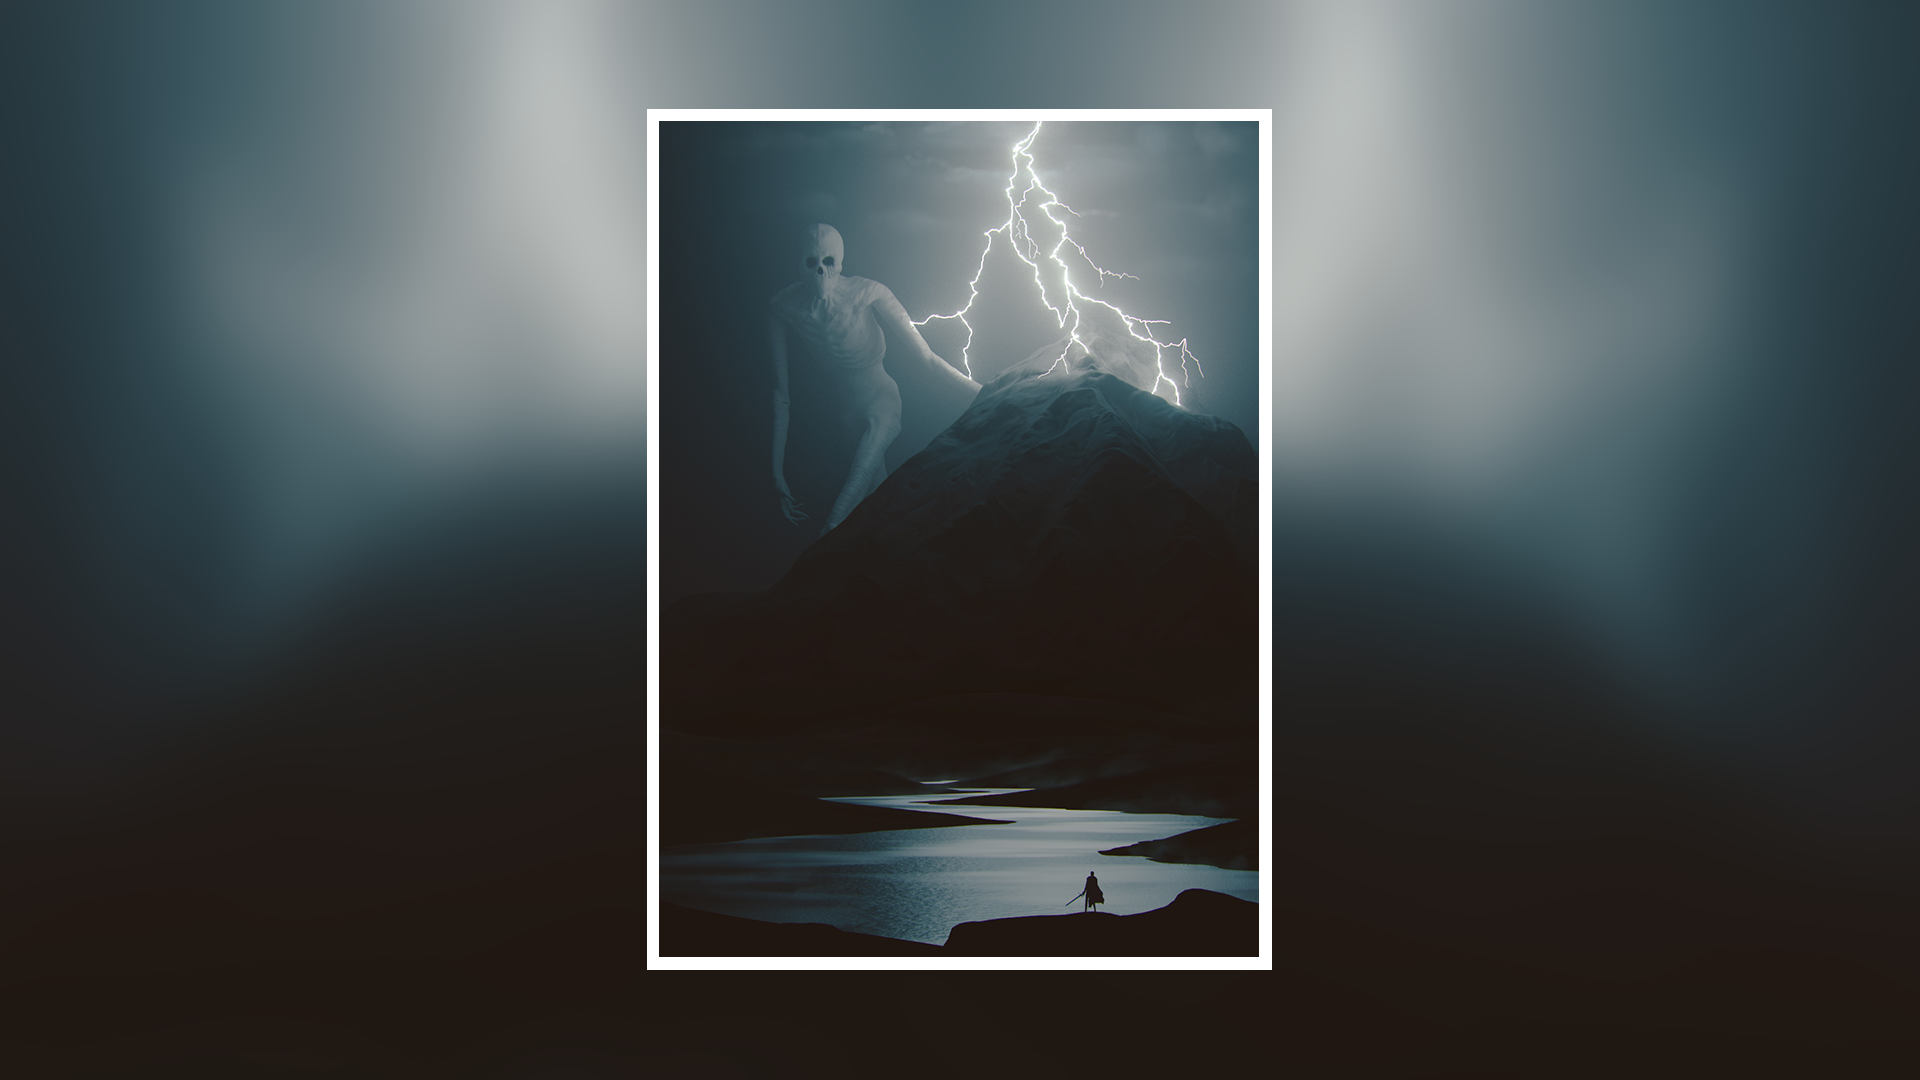 General 1920x1080 picture-in-picture lightning mountains lake creepy digital art creature